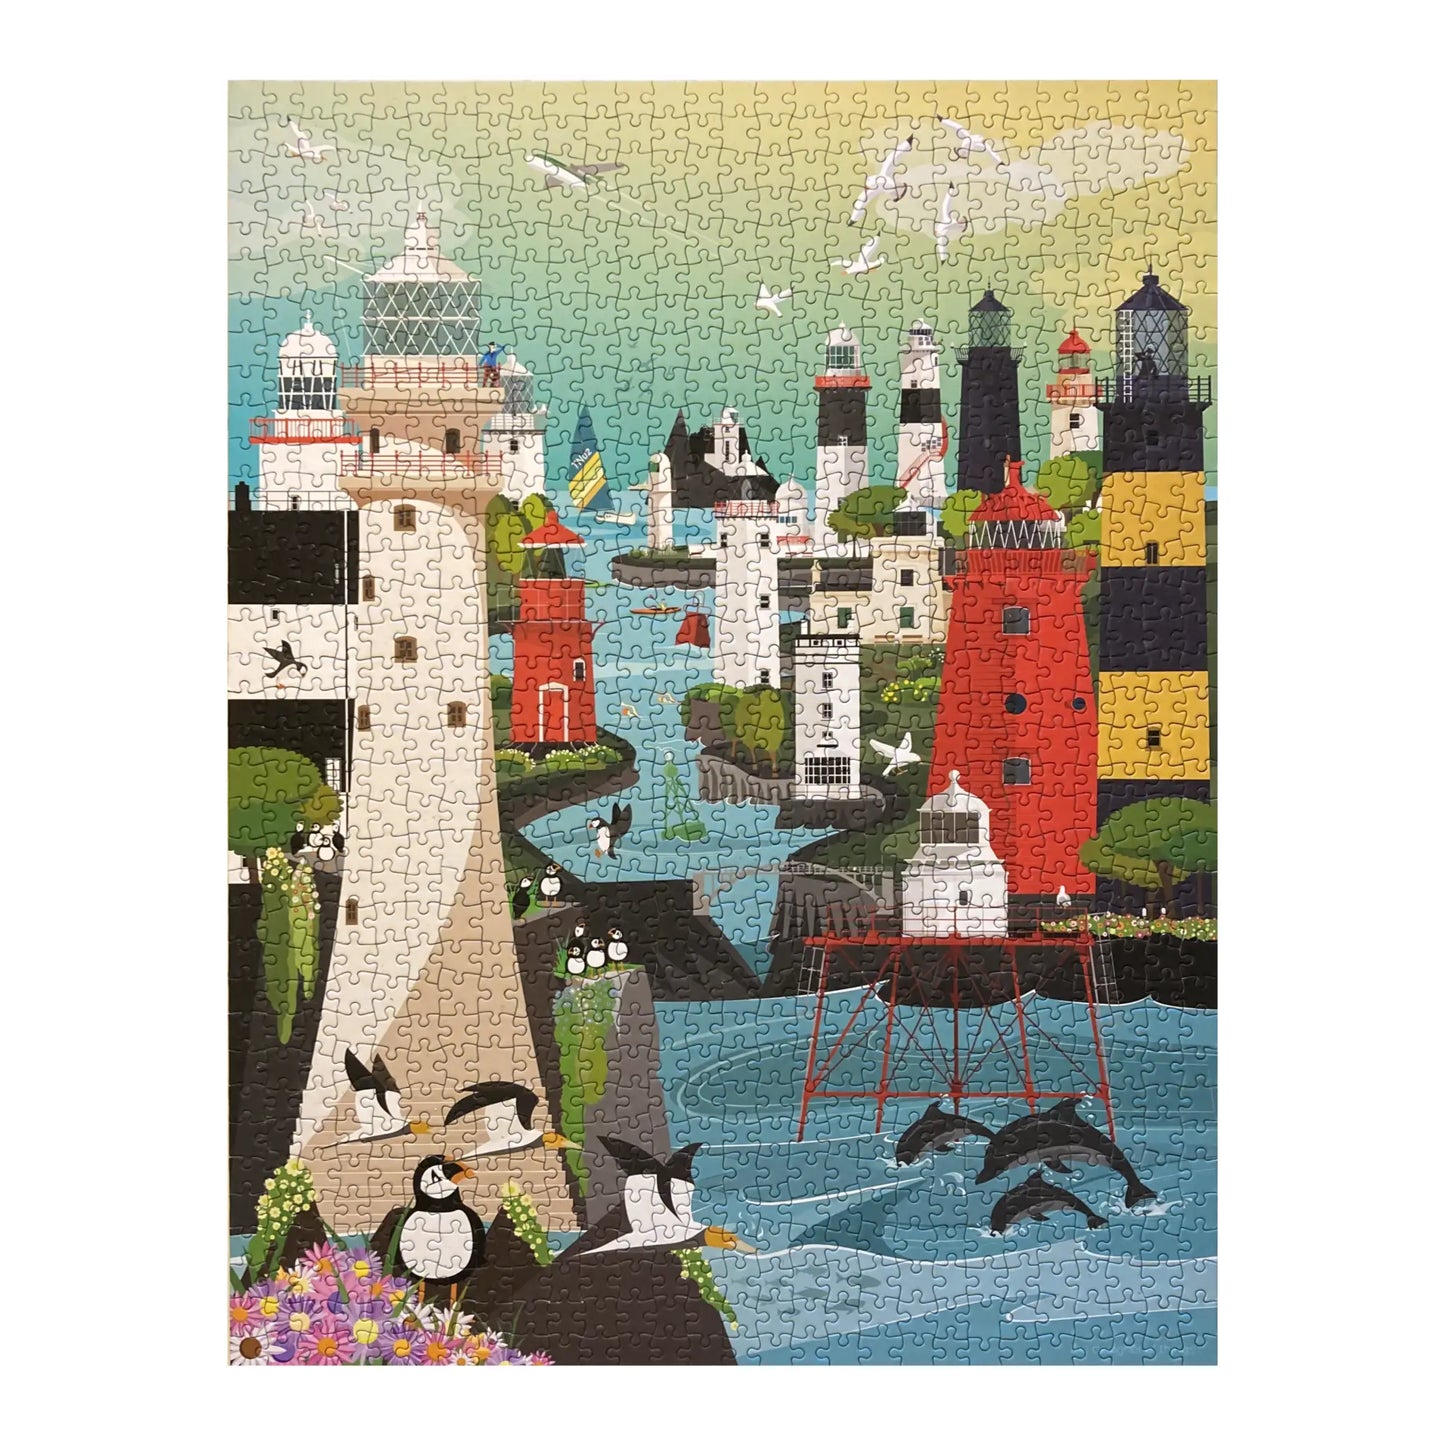 Lighthouses of Ireland 1000 piece jigsaw puzzle finished top view